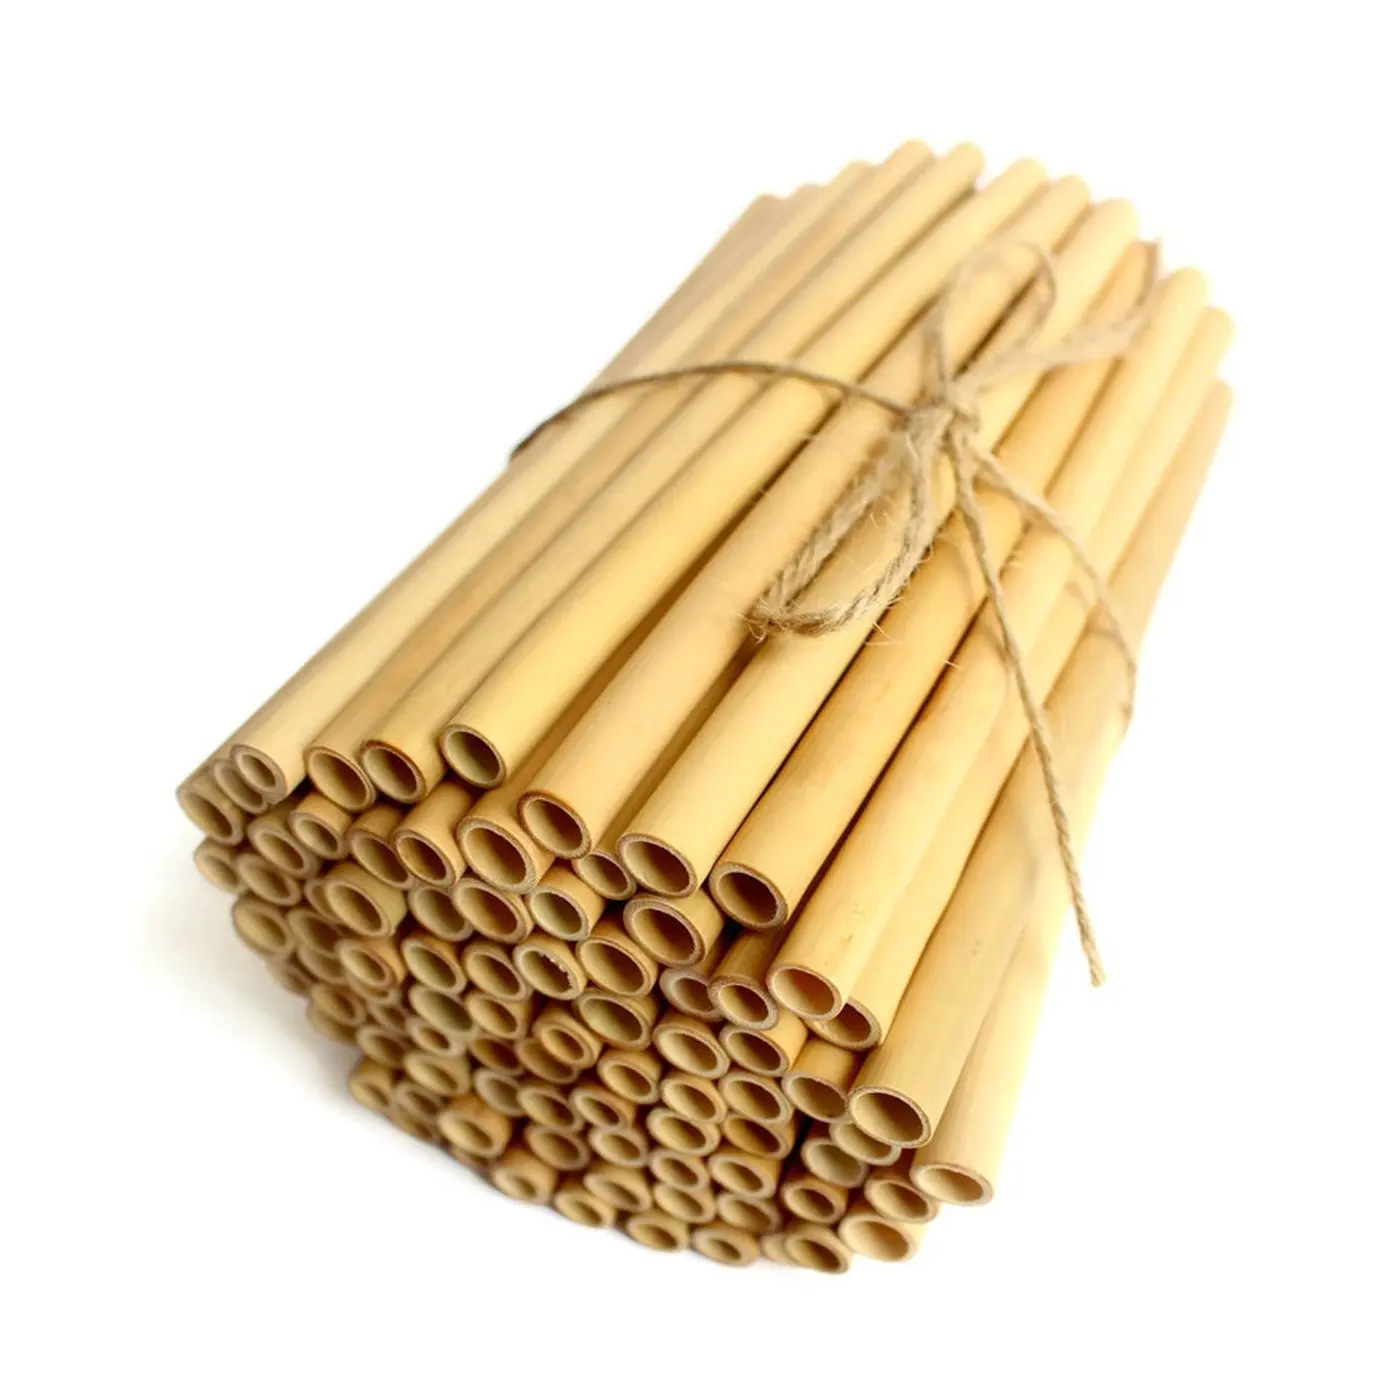 HIGH QUALITY NATURAL BAMBOO STRAW/BAMBOO STRAW DRINKING/ BAMBOO STRAW SET MADE IN VIETNAM